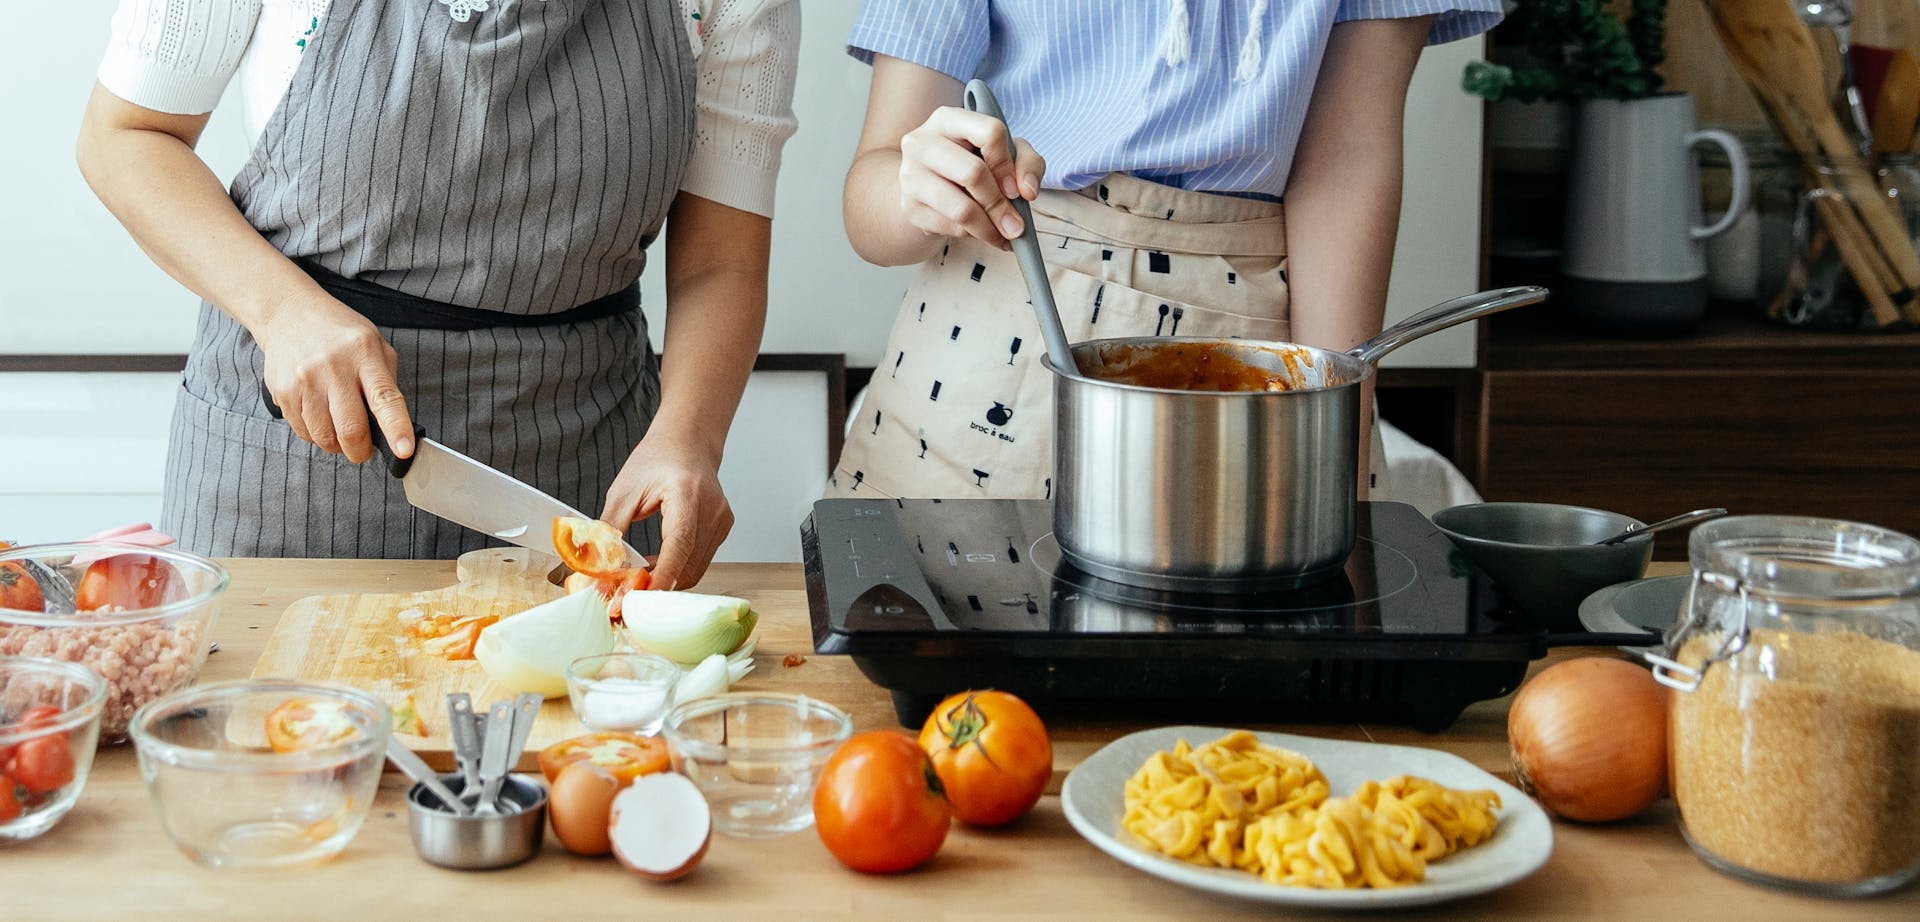 A close-up shot of two women cooking in the kitchen | Source: Pexels